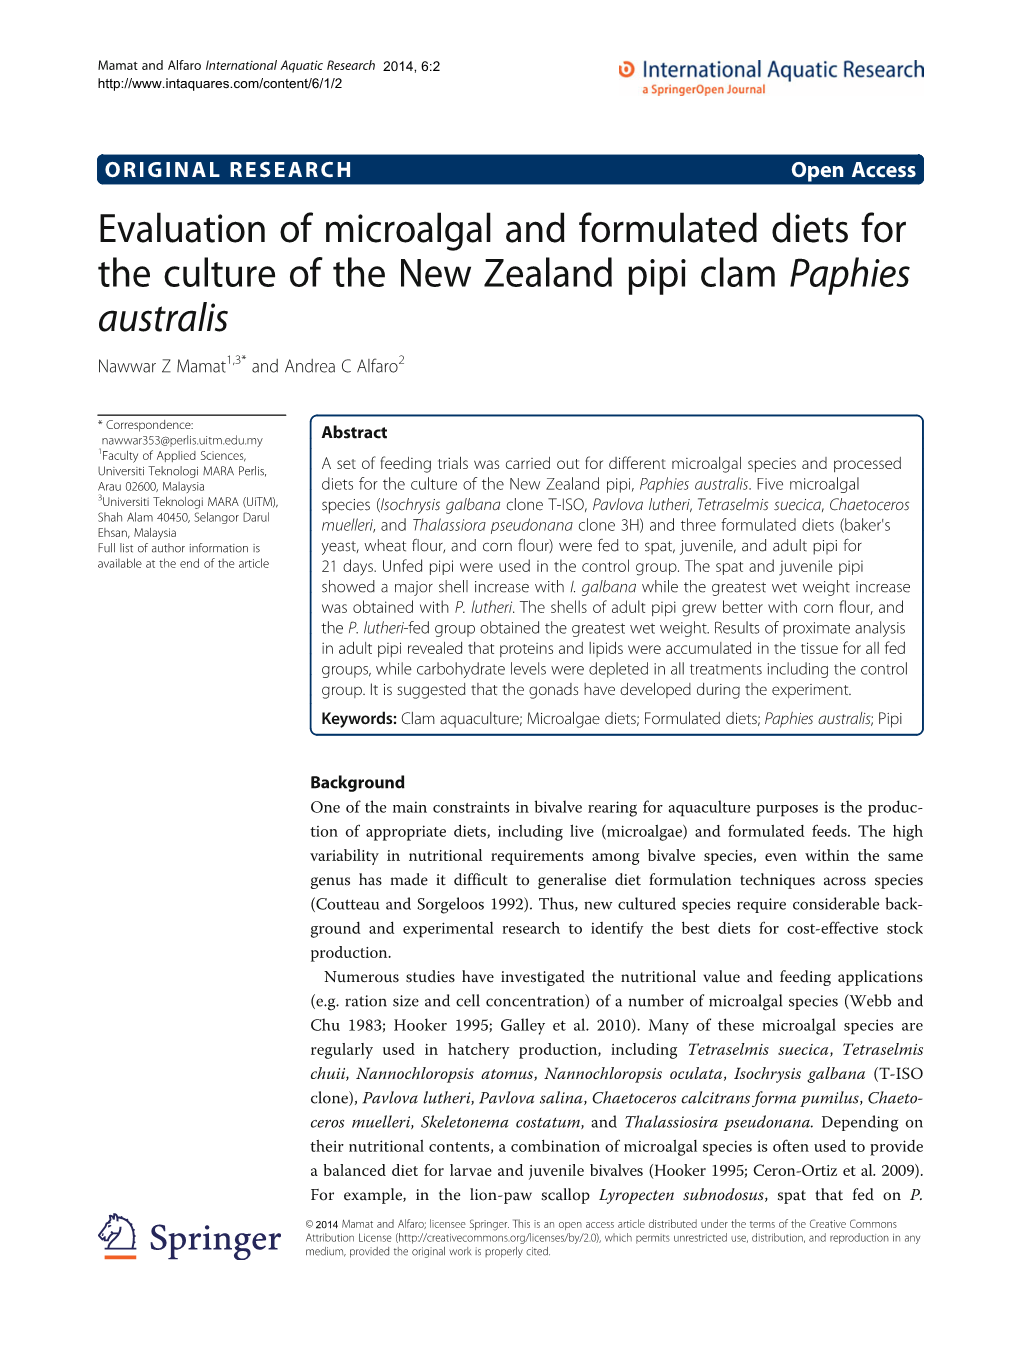 Evaluation of Microalgal and Formulated Diets for the Culture of the New Zealand Pipi Clam Paphies Australis